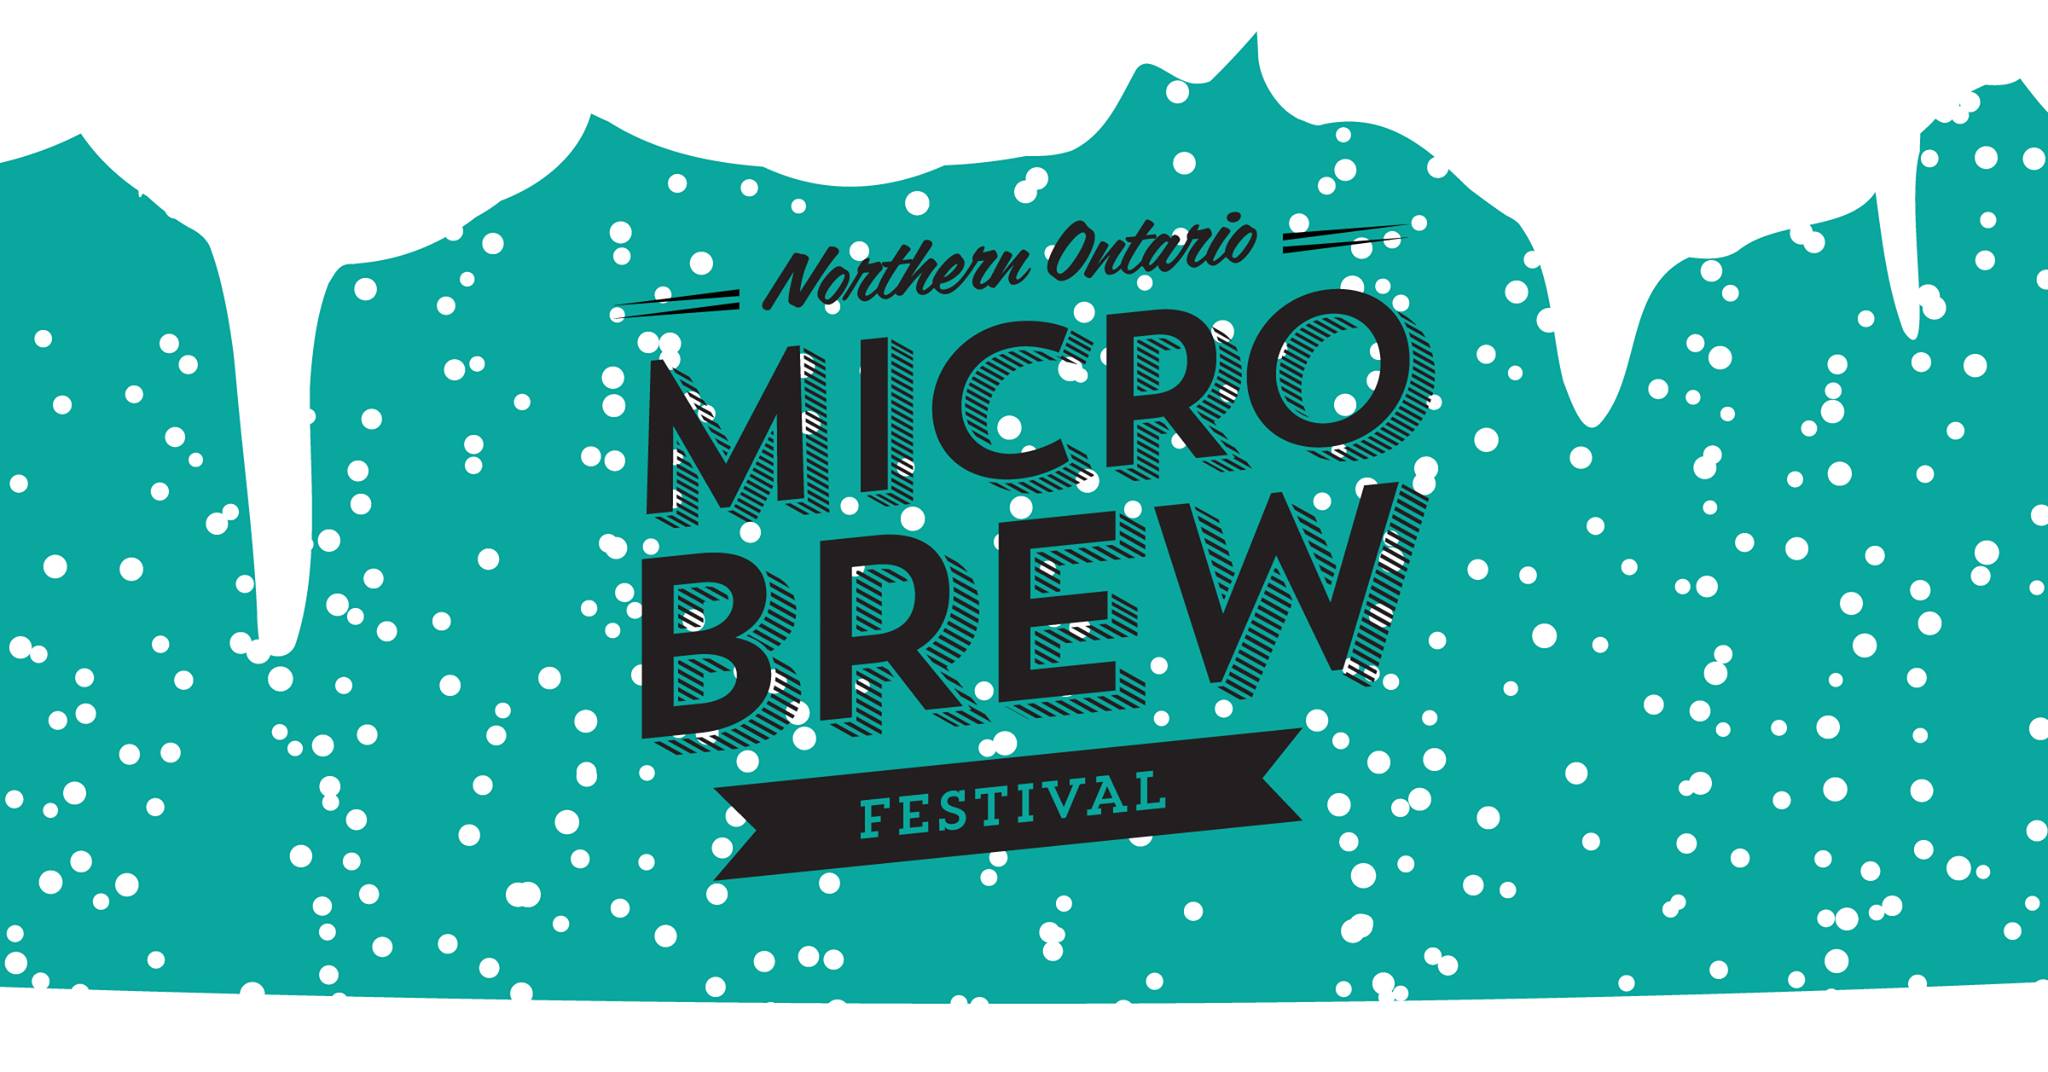 All of the breweries at Northern Ontario Microbrew Festival